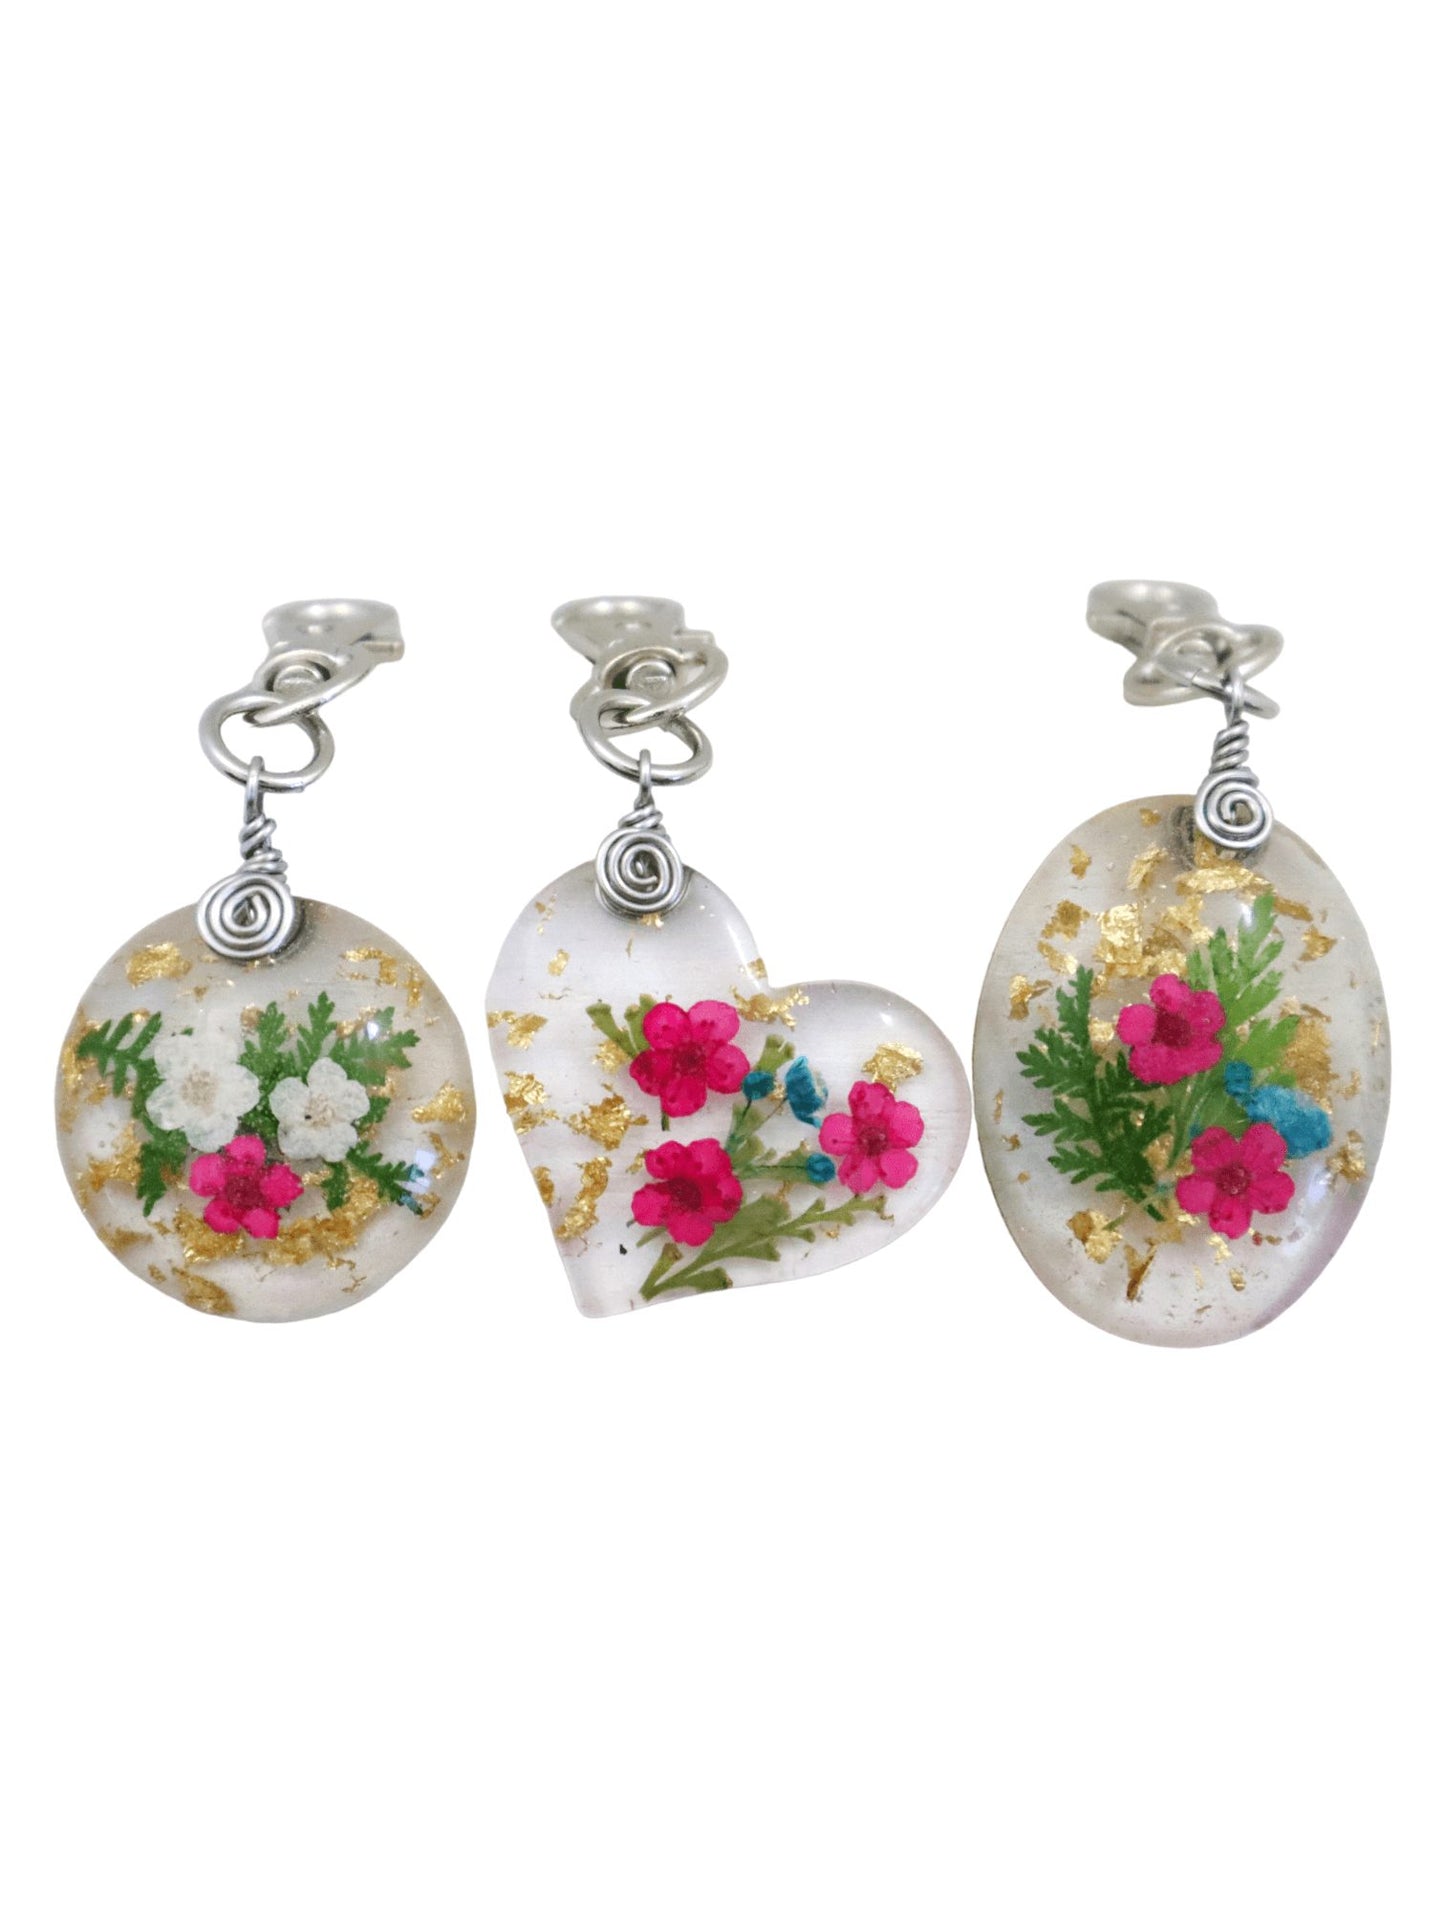 Trio-of-Real-Pressed-Flower-Charms-Circle-Heart-Oval-Charms-Kaleidoscopes-And-Polka-Dots